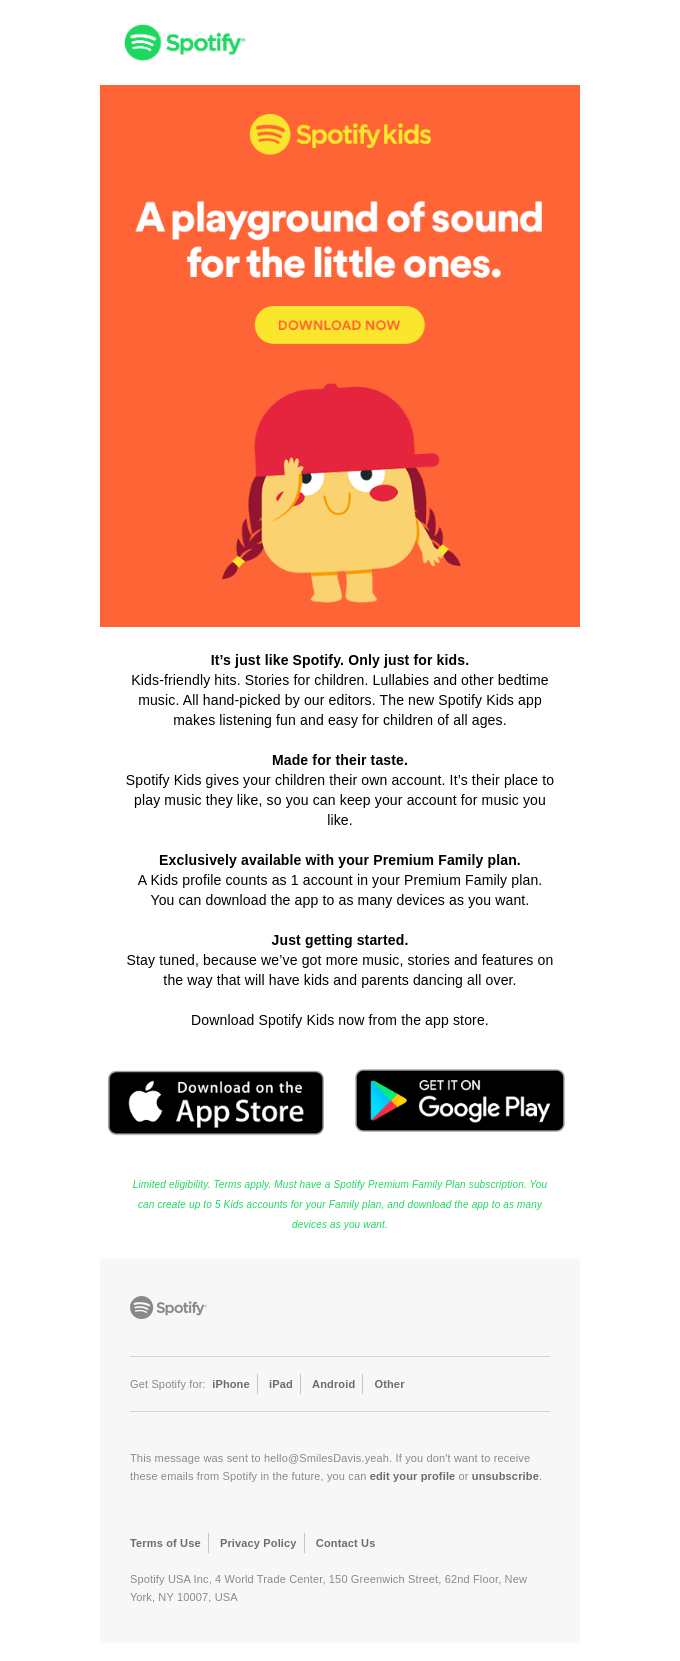 Spotify Kids: Meet our new app for young listeners - Spotify Email Newsletter